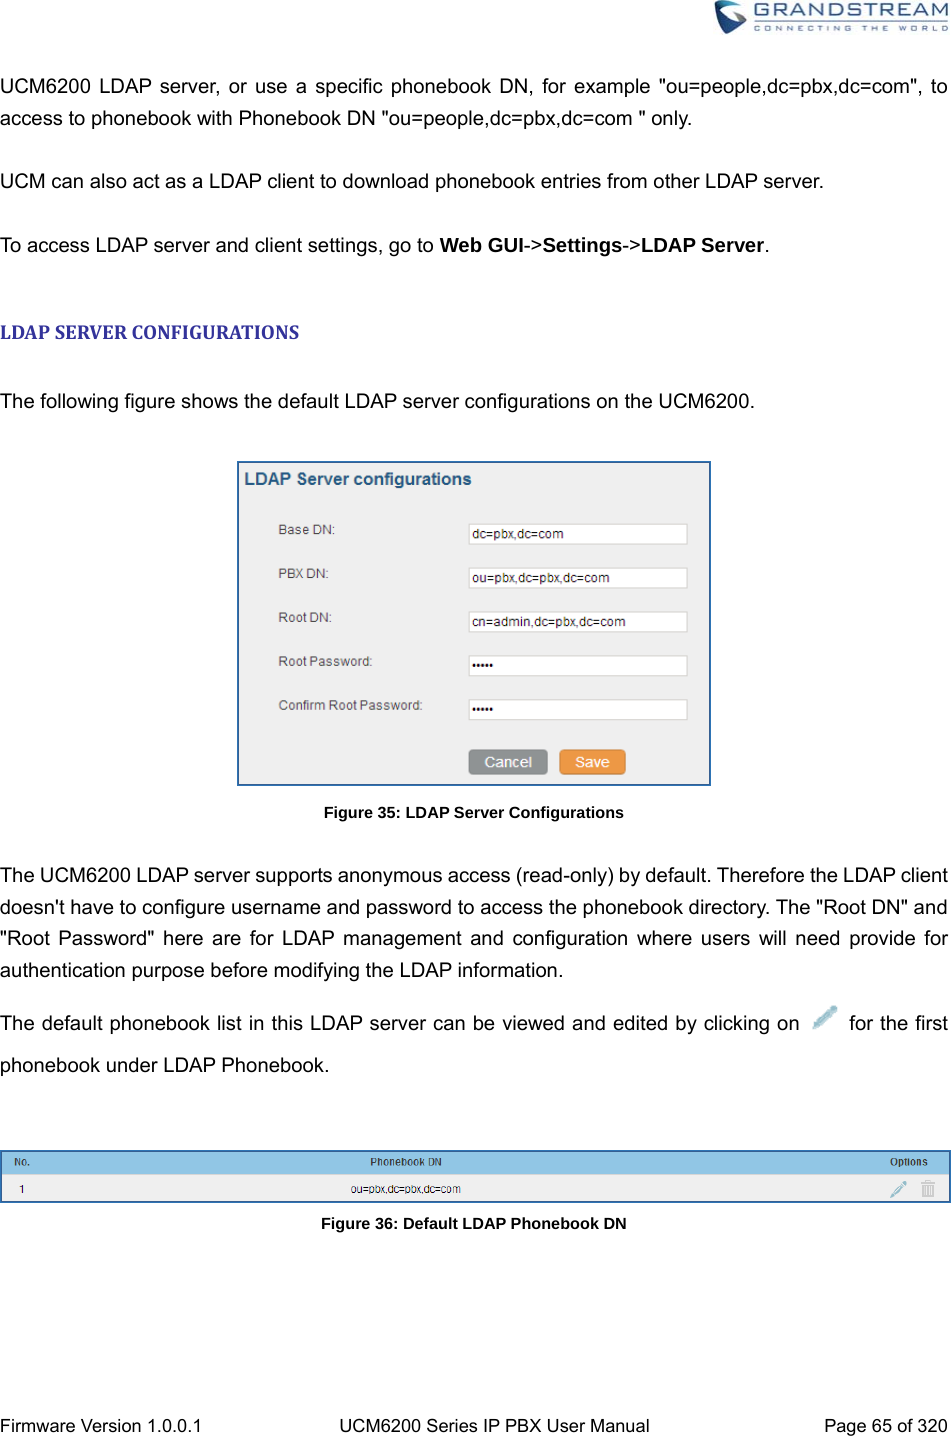  Firmware Version 1.0.0.1  UCM6200 Series IP PBX User Manual  Page 65 of 320 UCM6200 LDAP server, or use a specific phonebook DN, for example &quot;ou=people,dc=pbx,dc=com&quot;, to access to phonebook with Phonebook DN &quot;ou=people,dc=pbx,dc=com &quot; only.  UCM can also act as a LDAP client to download phonebook entries from other LDAP server.  To access LDAP server and client settings, go to Web GUI-&gt;Settings-&gt;LDAP Server.  LDAPSERVERCONFIGURATIONS The following figure shows the default LDAP server configurations on the UCM6200.   Figure 35: LDAP Server Configurations  The UCM6200 LDAP server supports anonymous access (read-only) by default. Therefore the LDAP client doesn&apos;t have to configure username and password to access the phonebook directory. The &quot;Root DN&quot; and &quot;Root Password&quot; here are for LDAP management and configuration where users will need provide for authentication purpose before modifying the LDAP information. The default phonebook list in this LDAP server can be viewed and edited by clicking on   for the first phonebook under LDAP Phonebook.   Figure 36: Default LDAP Phonebook DN  